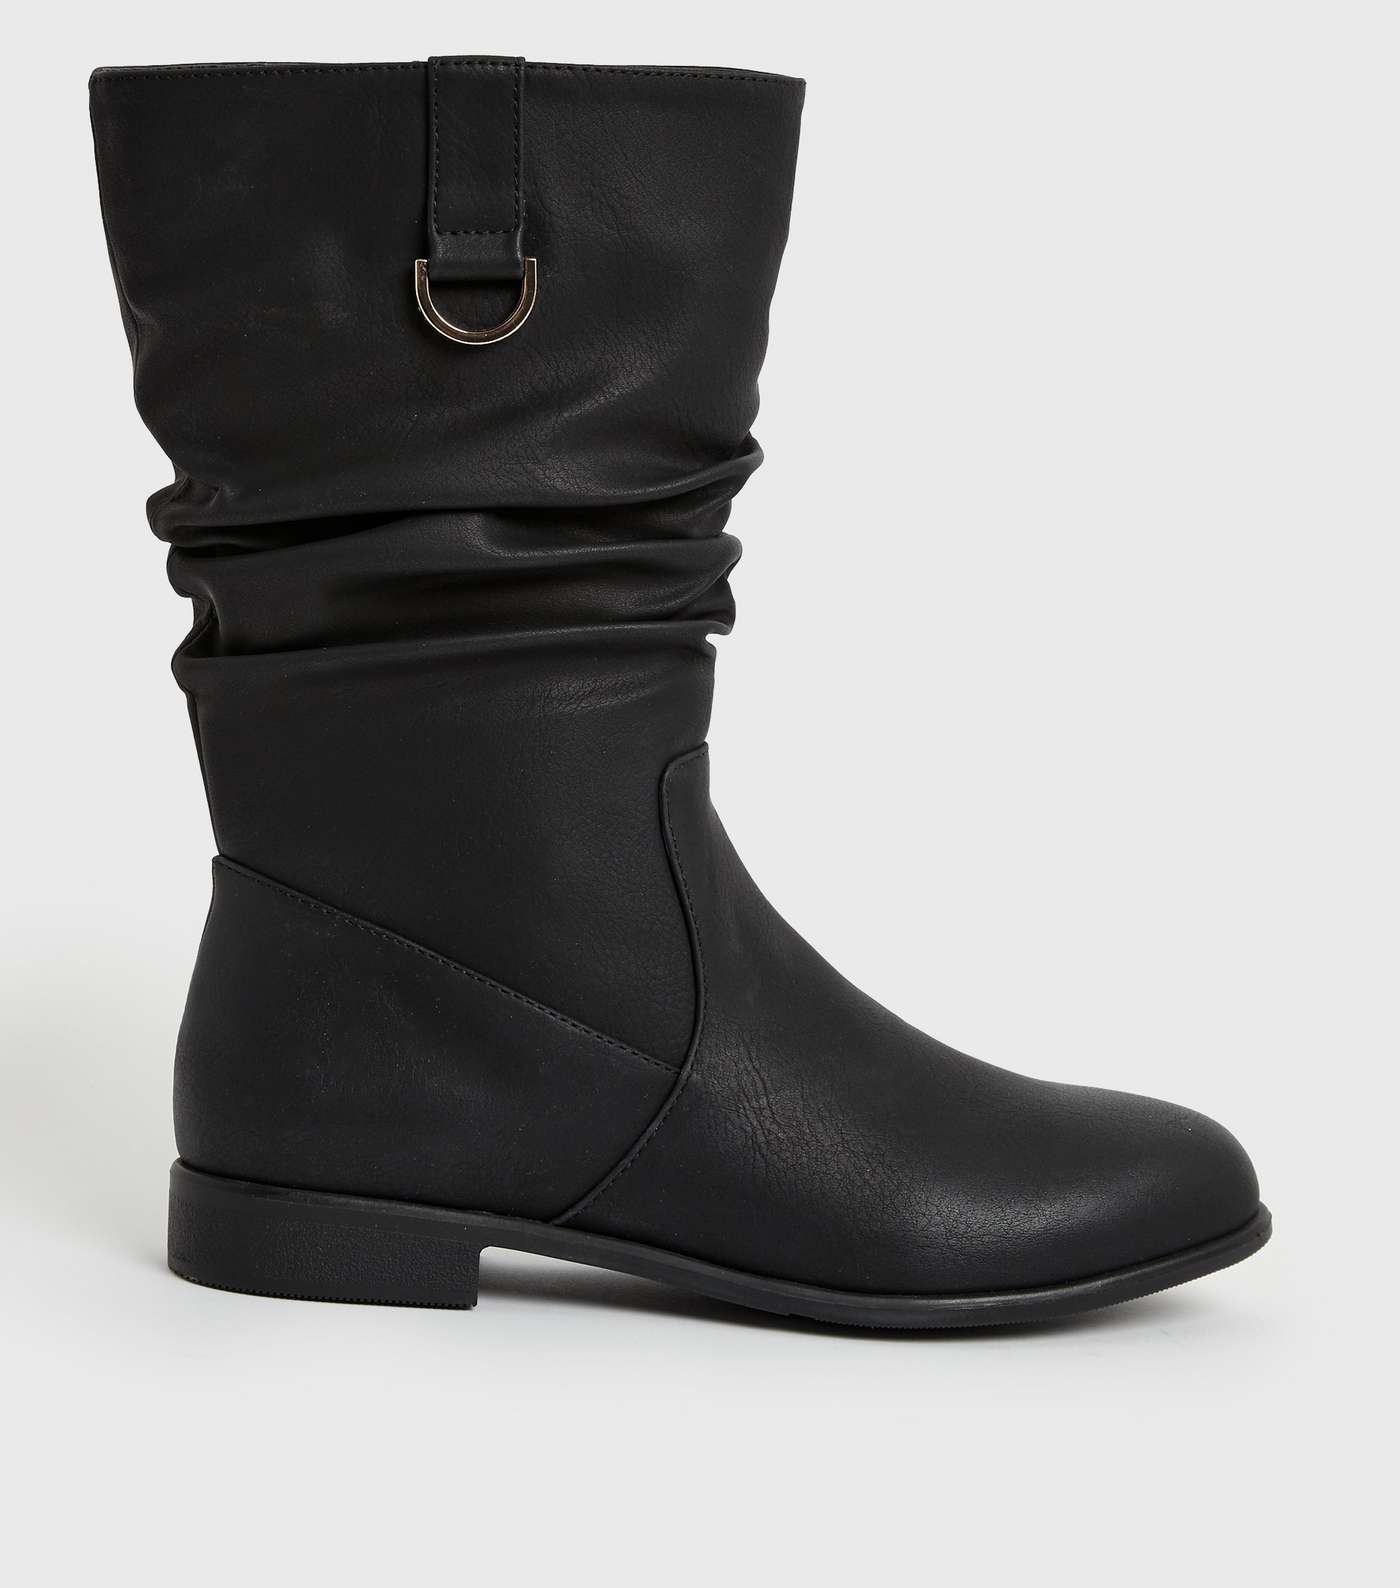 Black Leather-Look Mid Calf Slouch Boots